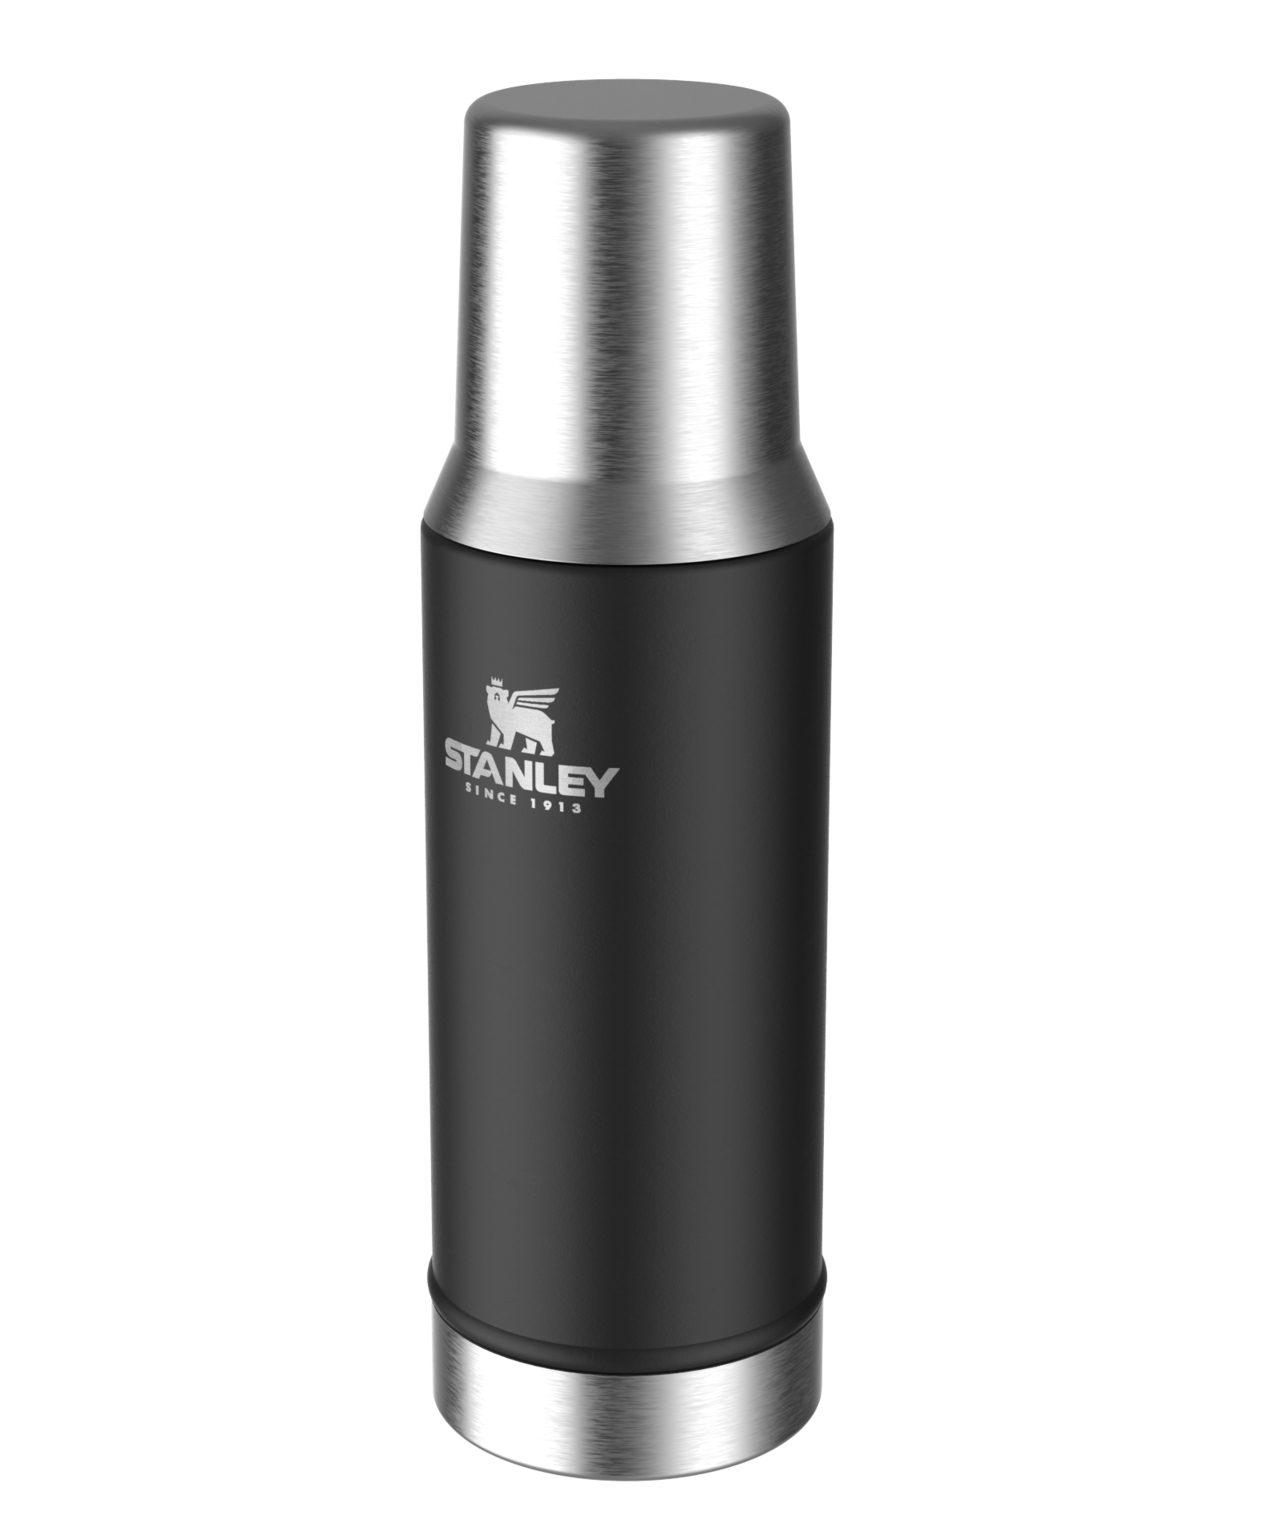 Termo + Mate Stanley Mate System 0.8litros